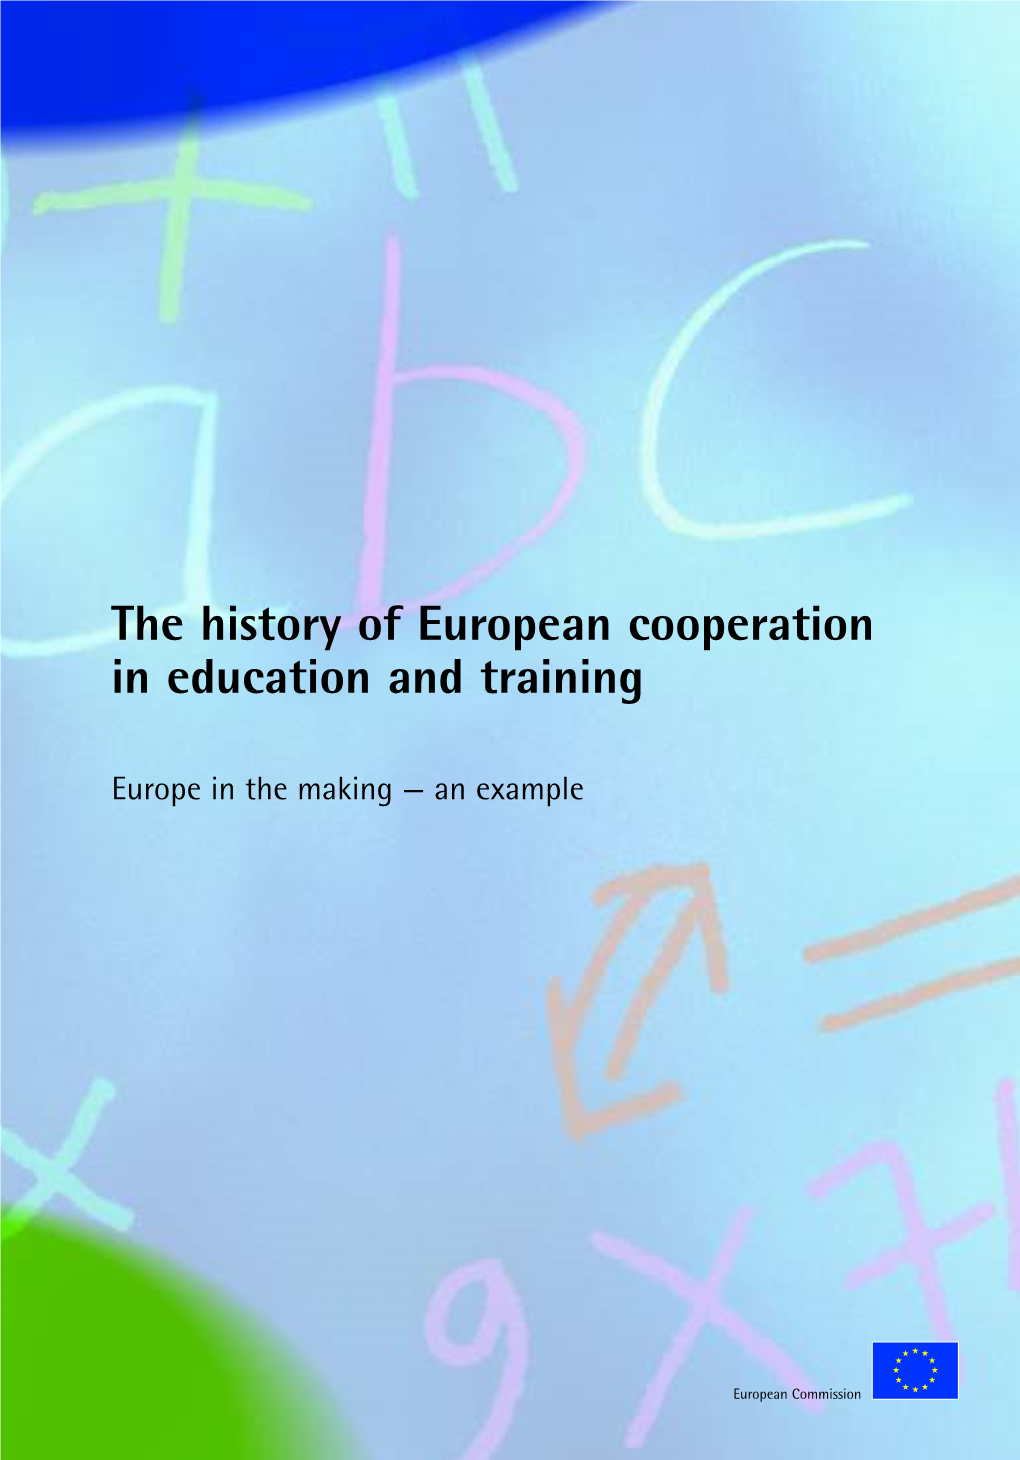 The History of European Cooperation in Education and Training